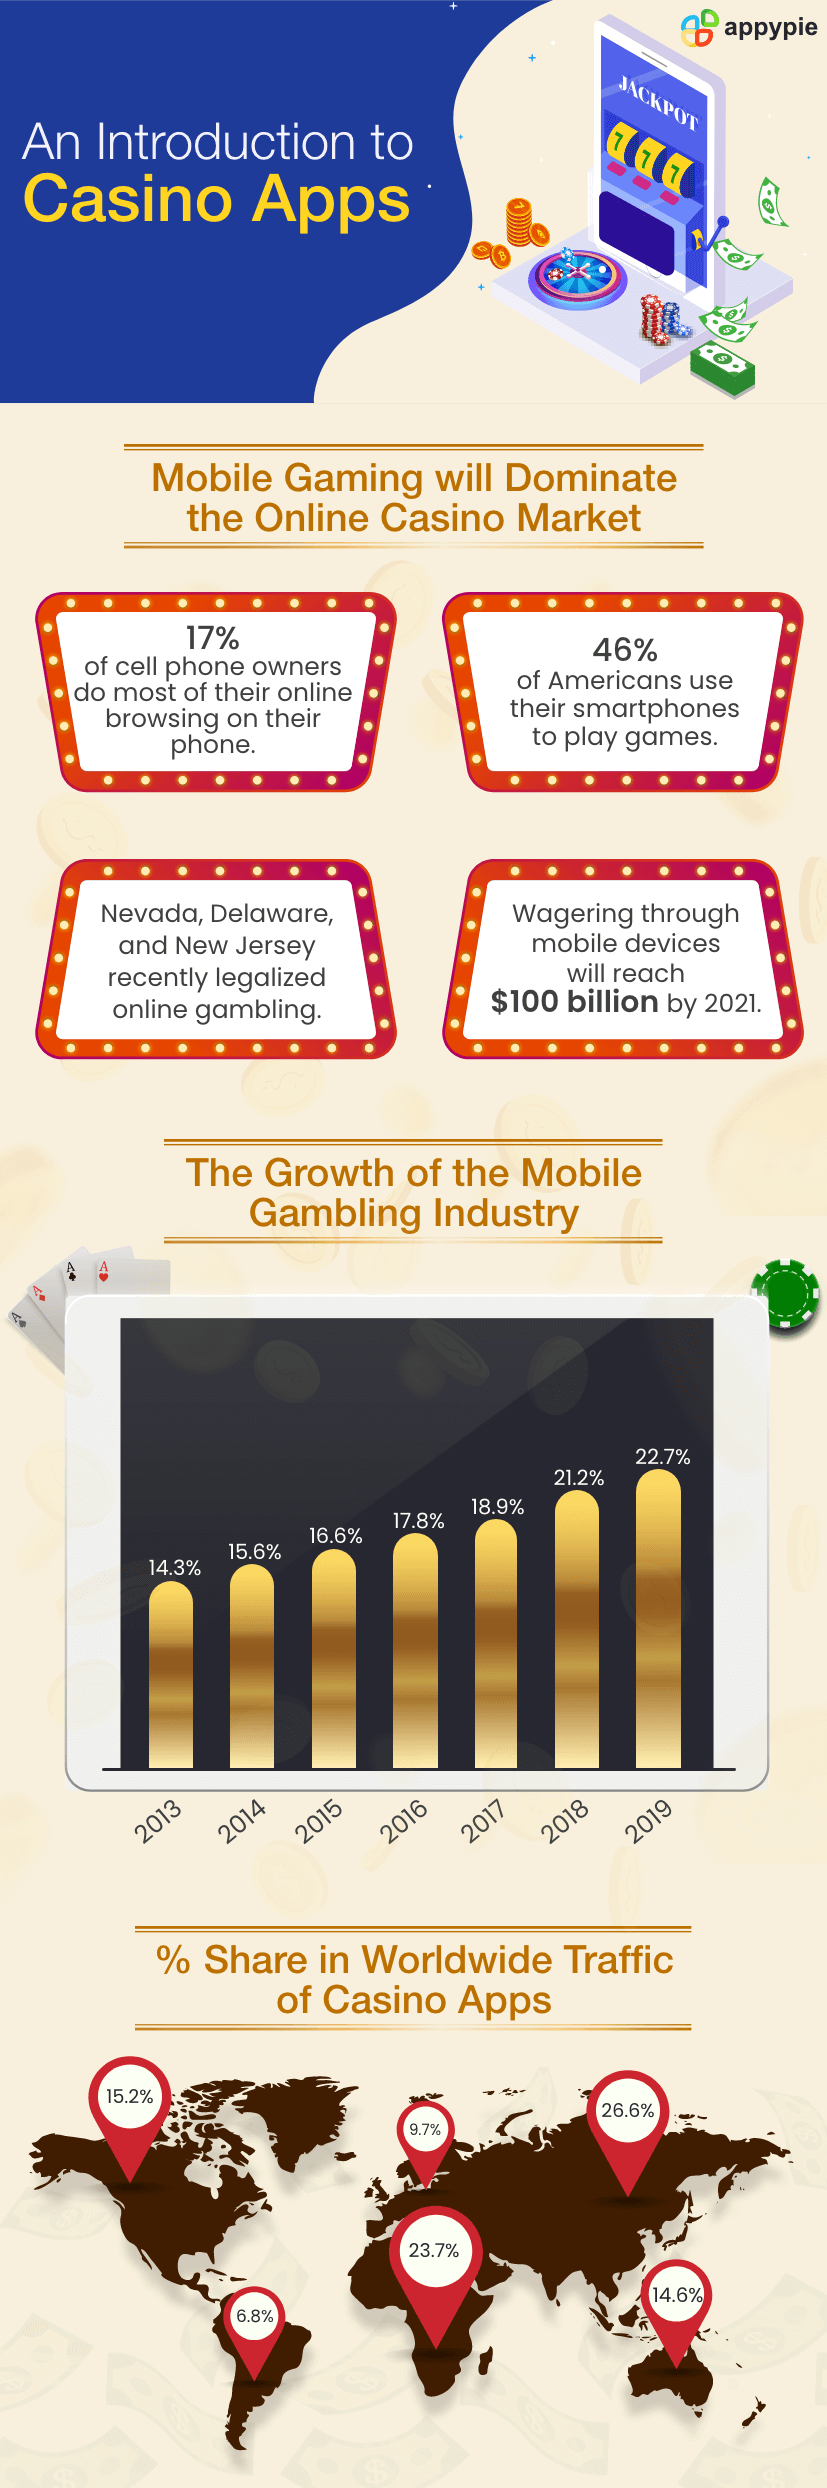 An Introduction to Casino Apps - Appy Pie